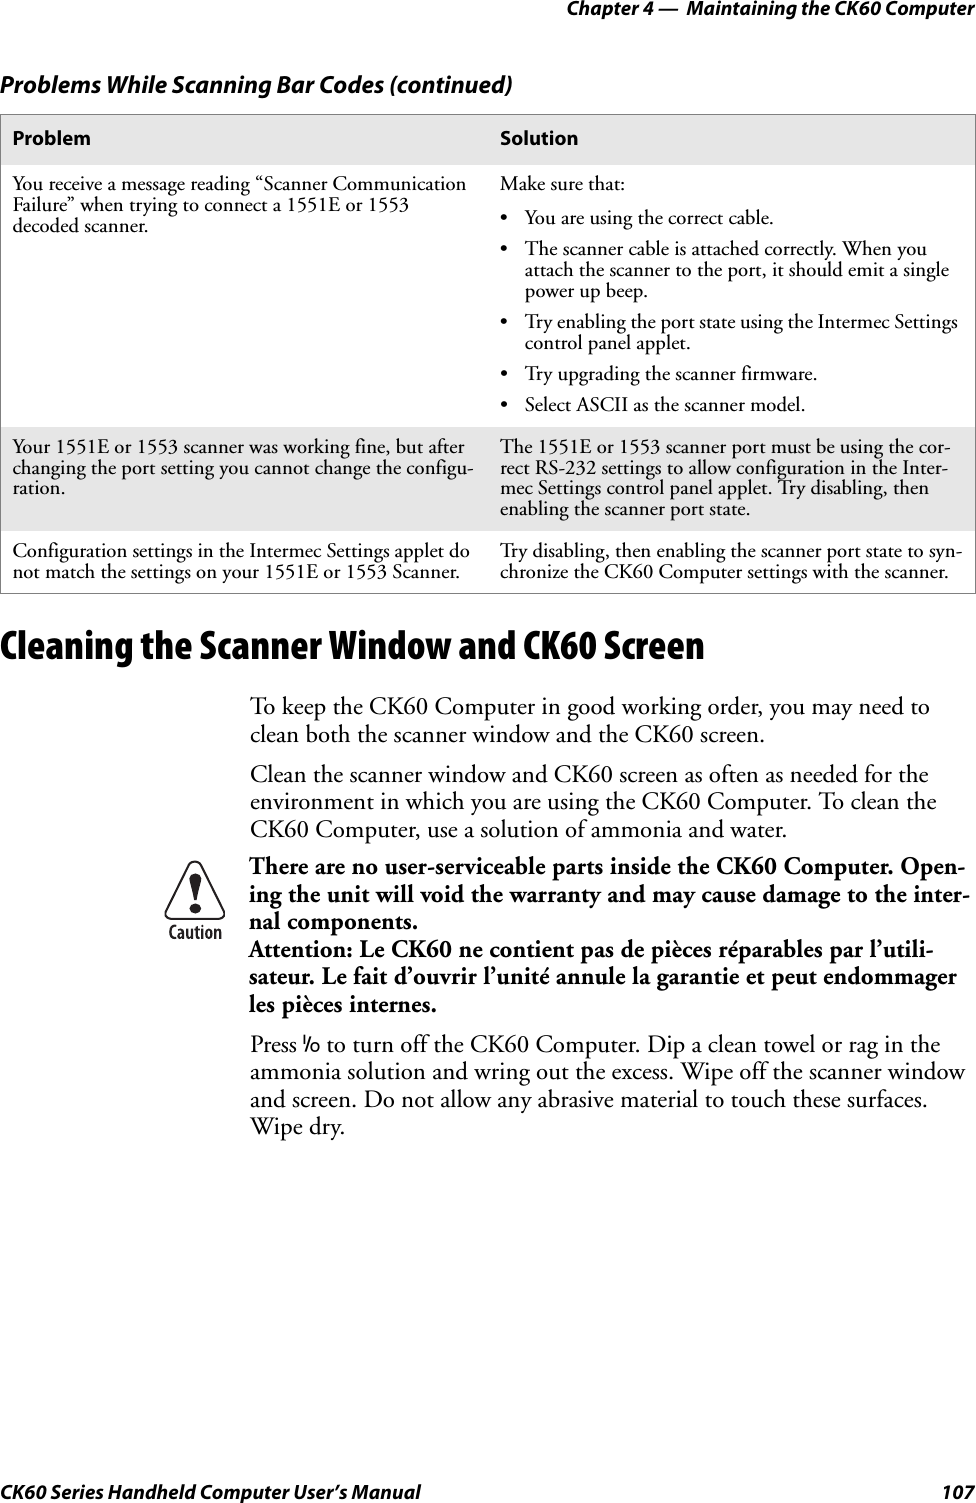 Chapter 4 —  Maintaining the CK60 ComputerCK60 Series Handheld Computer User’s Manual 107Cleaning the Scanner Window and CK60 ScreenTo keep the CK60 Computer in good working order, you may need to clean both the scanner window and the CK60 screen.Clean the scanner window and CK60 screen as often as needed for the environment in which you are using the CK60 Computer. To clean the CK60 Computer, use a solution of ammonia and water.Press I to turn off the CK60 Computer. Dip a clean towel or rag in the ammonia solution and wring out the excess. Wipe off the scanner window and screen. Do not allow any abrasive material to touch these surfaces. Wipe dry.You receive a message reading “Scanner Communication Failure” when trying to connect a 1551E or 1553 decoded scanner.Make sure that:• You are using the correct cable.• The scanner cable is attached correctly. When you attach the scanner to the port, it should emit a single power up beep.• Try enabling the port state using the Intermec Settings control panel applet.• Try upgrading the scanner firmware.• Select ASCII as the scanner model.Your 1551E or 1553 scanner was working fine, but after changing the port setting you cannot change the configu-ration.The 1551E or 1553 scanner port must be using the cor-rect RS-232 settings to allow configuration in the Inter-mec Settings control panel applet. Try disabling, then enabling the scanner port state.Configuration settings in the Intermec Settings applet do not match the settings on your 1551E or 1553 Scanner.Try disabling, then enabling the scanner port state to syn-chronize the CK60 Computer settings with the scanner.There are no user-serviceable parts inside the CK60 Computer. Open-ing the unit will void the warranty and may cause damage to the inter-nal components.Attention: Le CK60 ne contient pas de pièces réparables par l’utili-sateur. Le fait d’ouvrir l’unité annule la garantie et peut endommager les pièces internes.Problems While Scanning Bar Codes (continued)Problem Solution